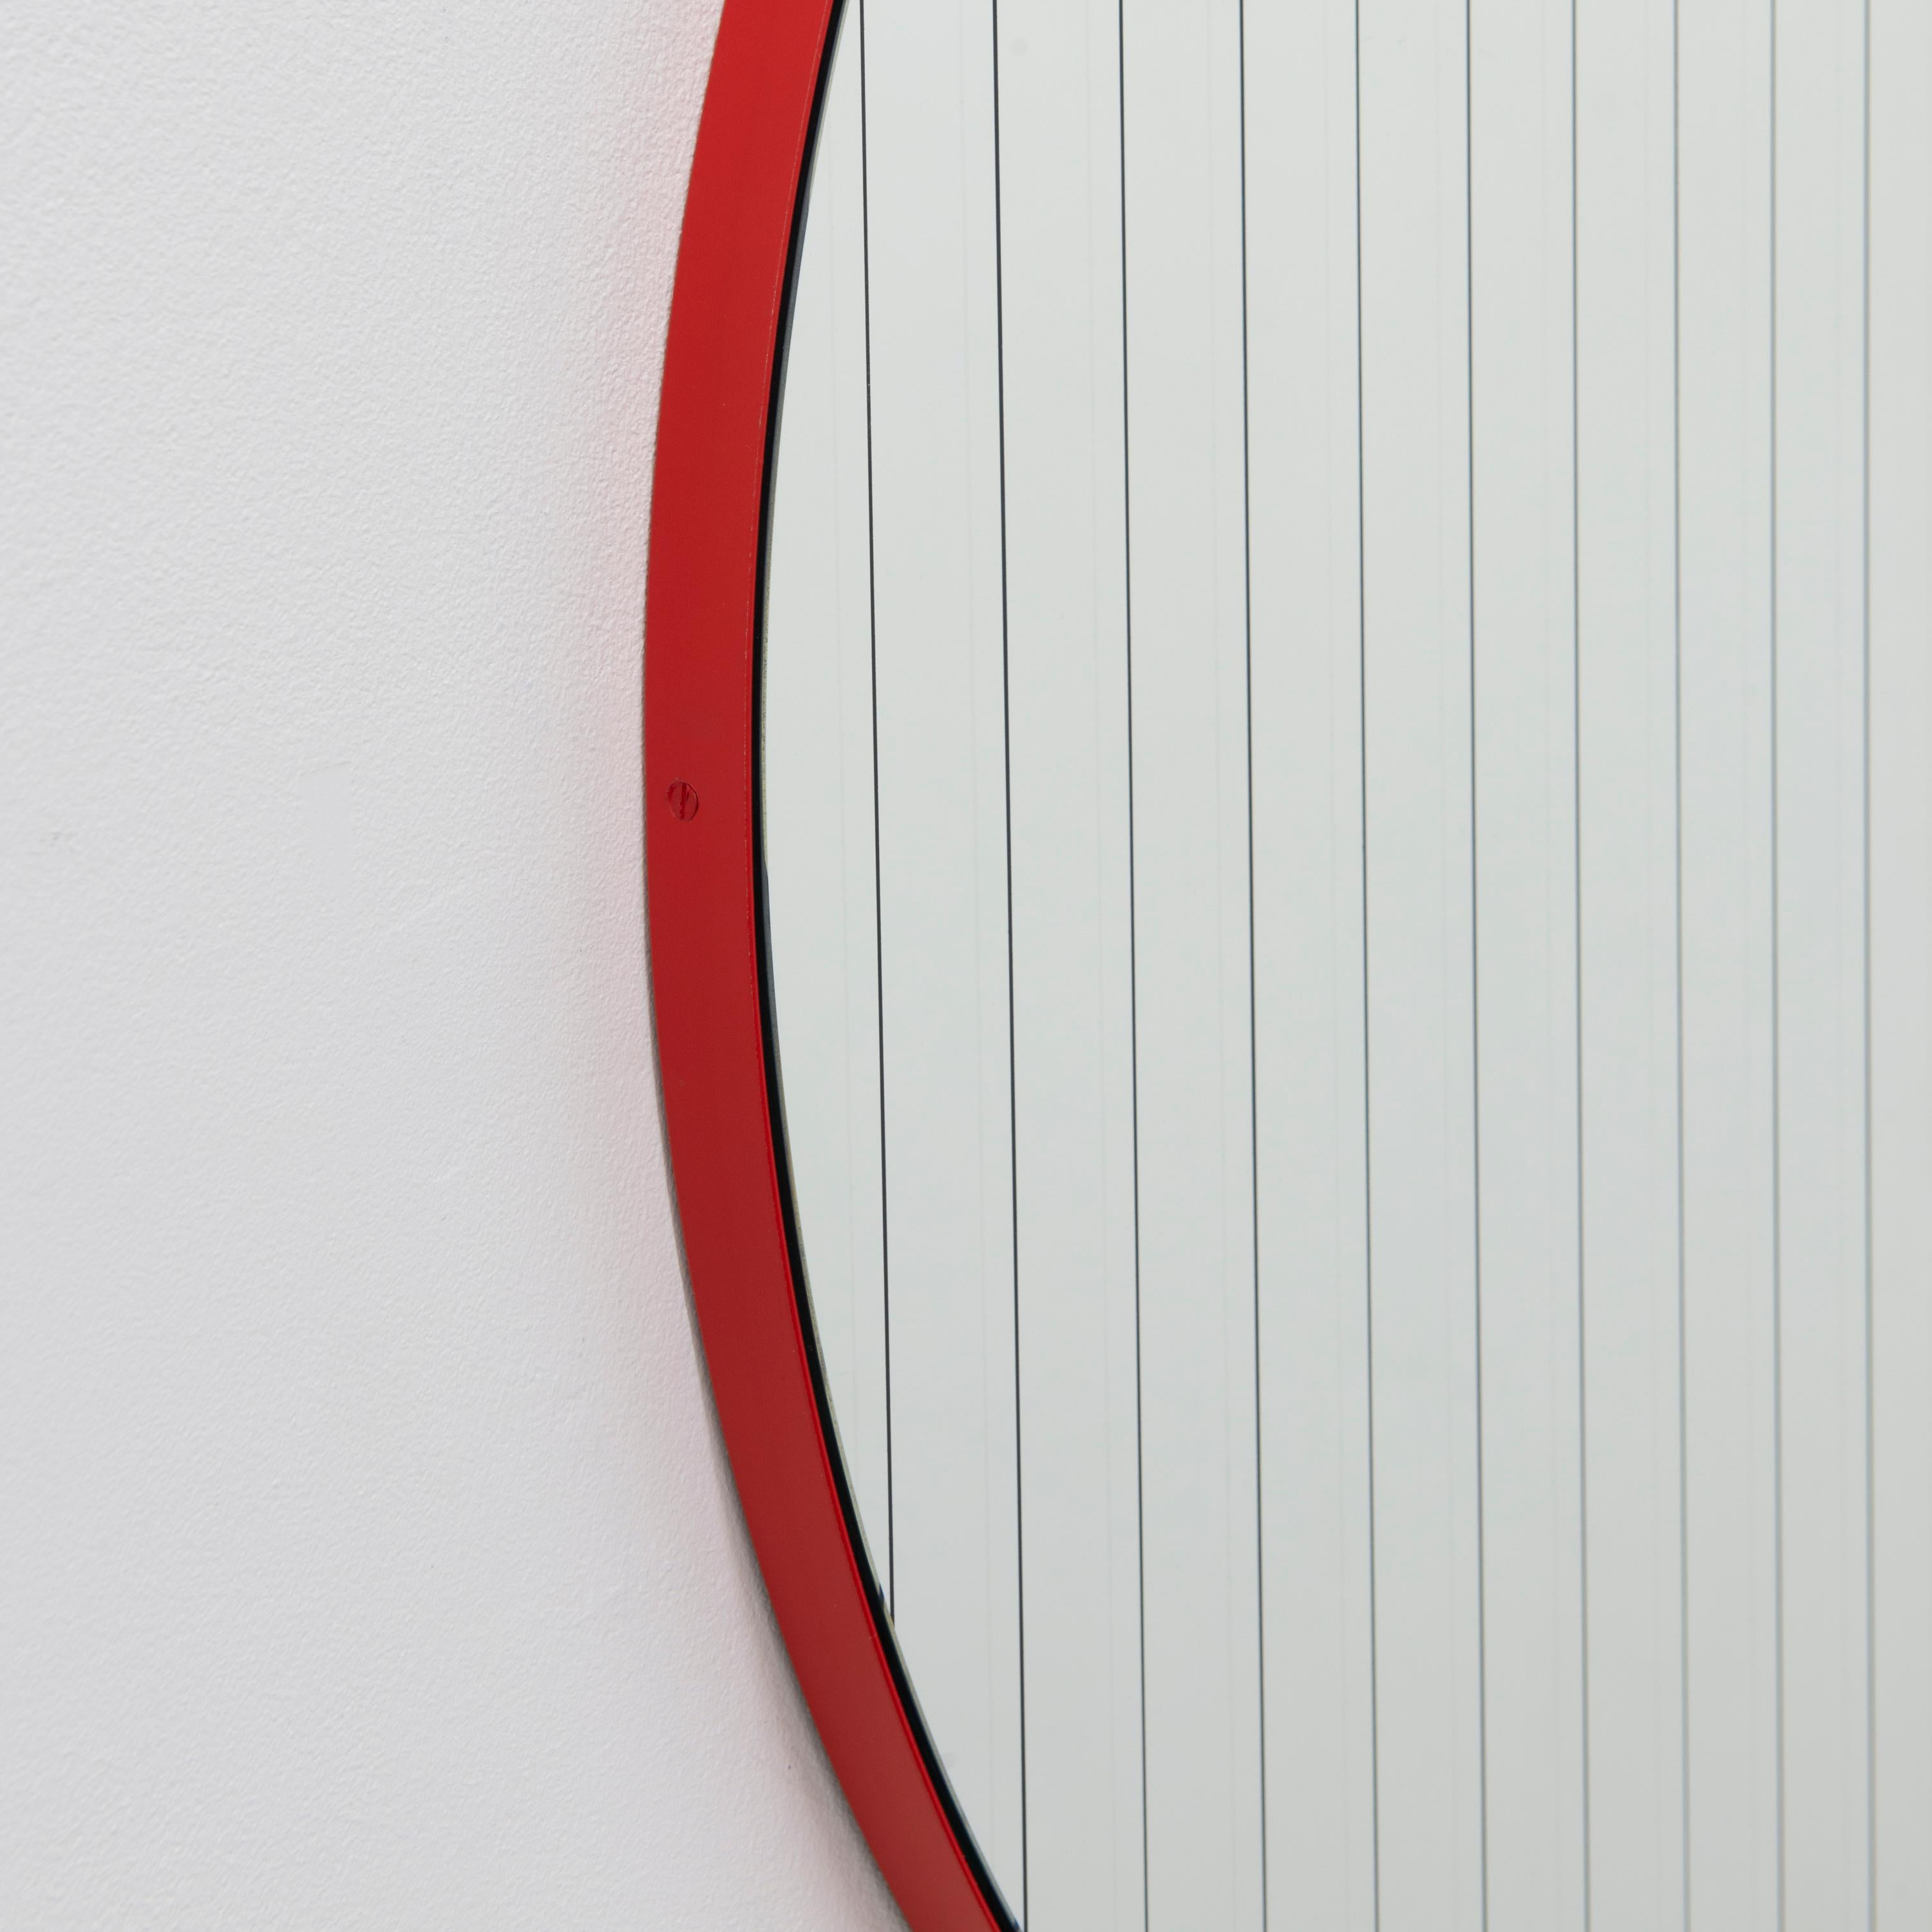 British In Stock Orbis Linus Round Mirror with Etched Strips and Red Frame, Medium For Sale